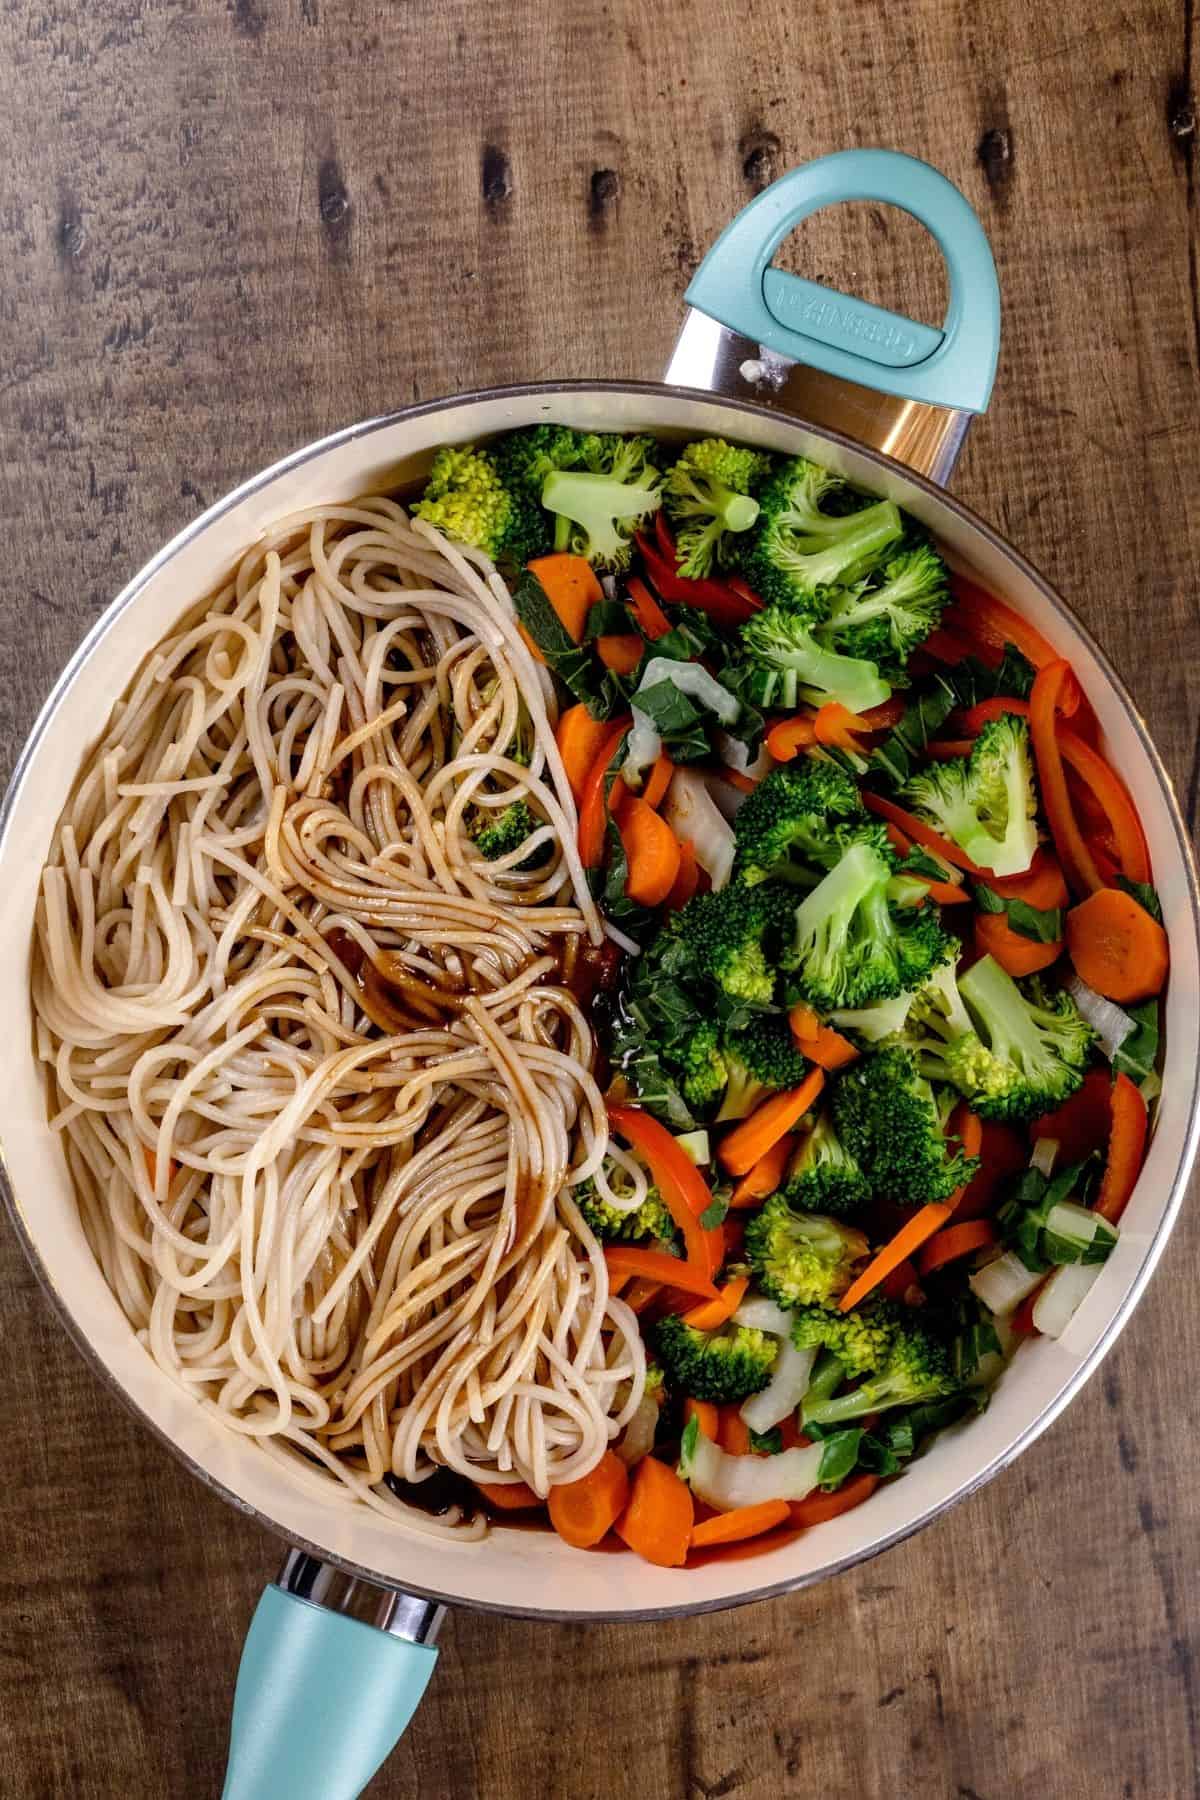 A blue and white fry pan is half filled with cooked veggies and half filled with brown rice noodles. The sauce is poured over top. The pan is on a wood tabletop.